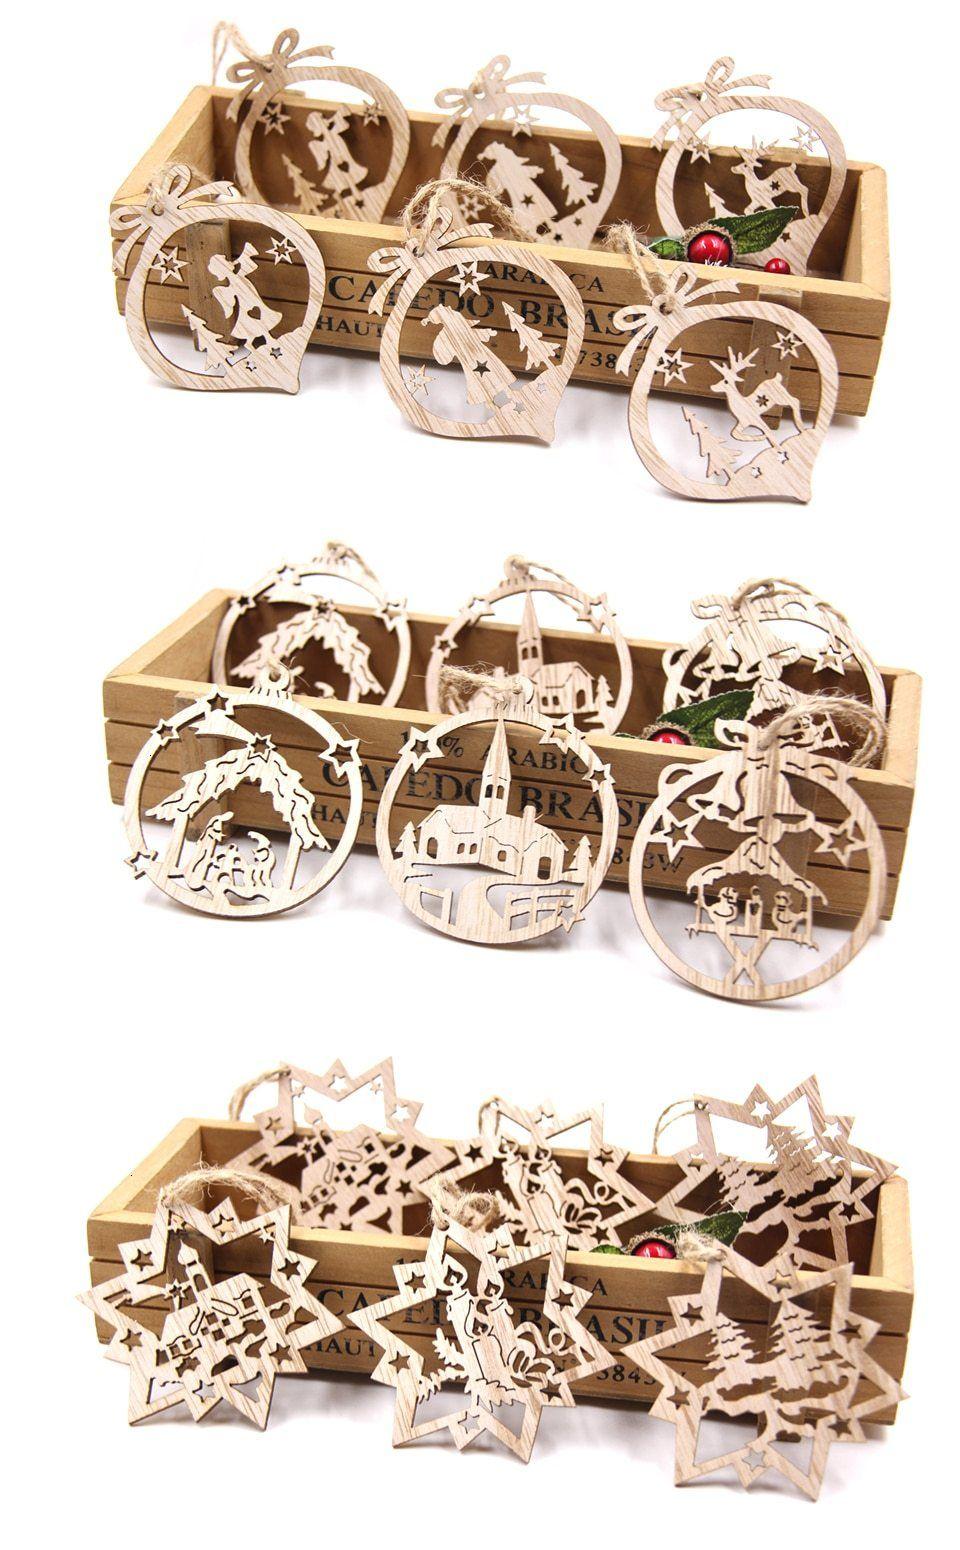 Vintage Wooden Pendants Ornaments Christmas Tree Decorations -12pcs in Box The GoatFind 